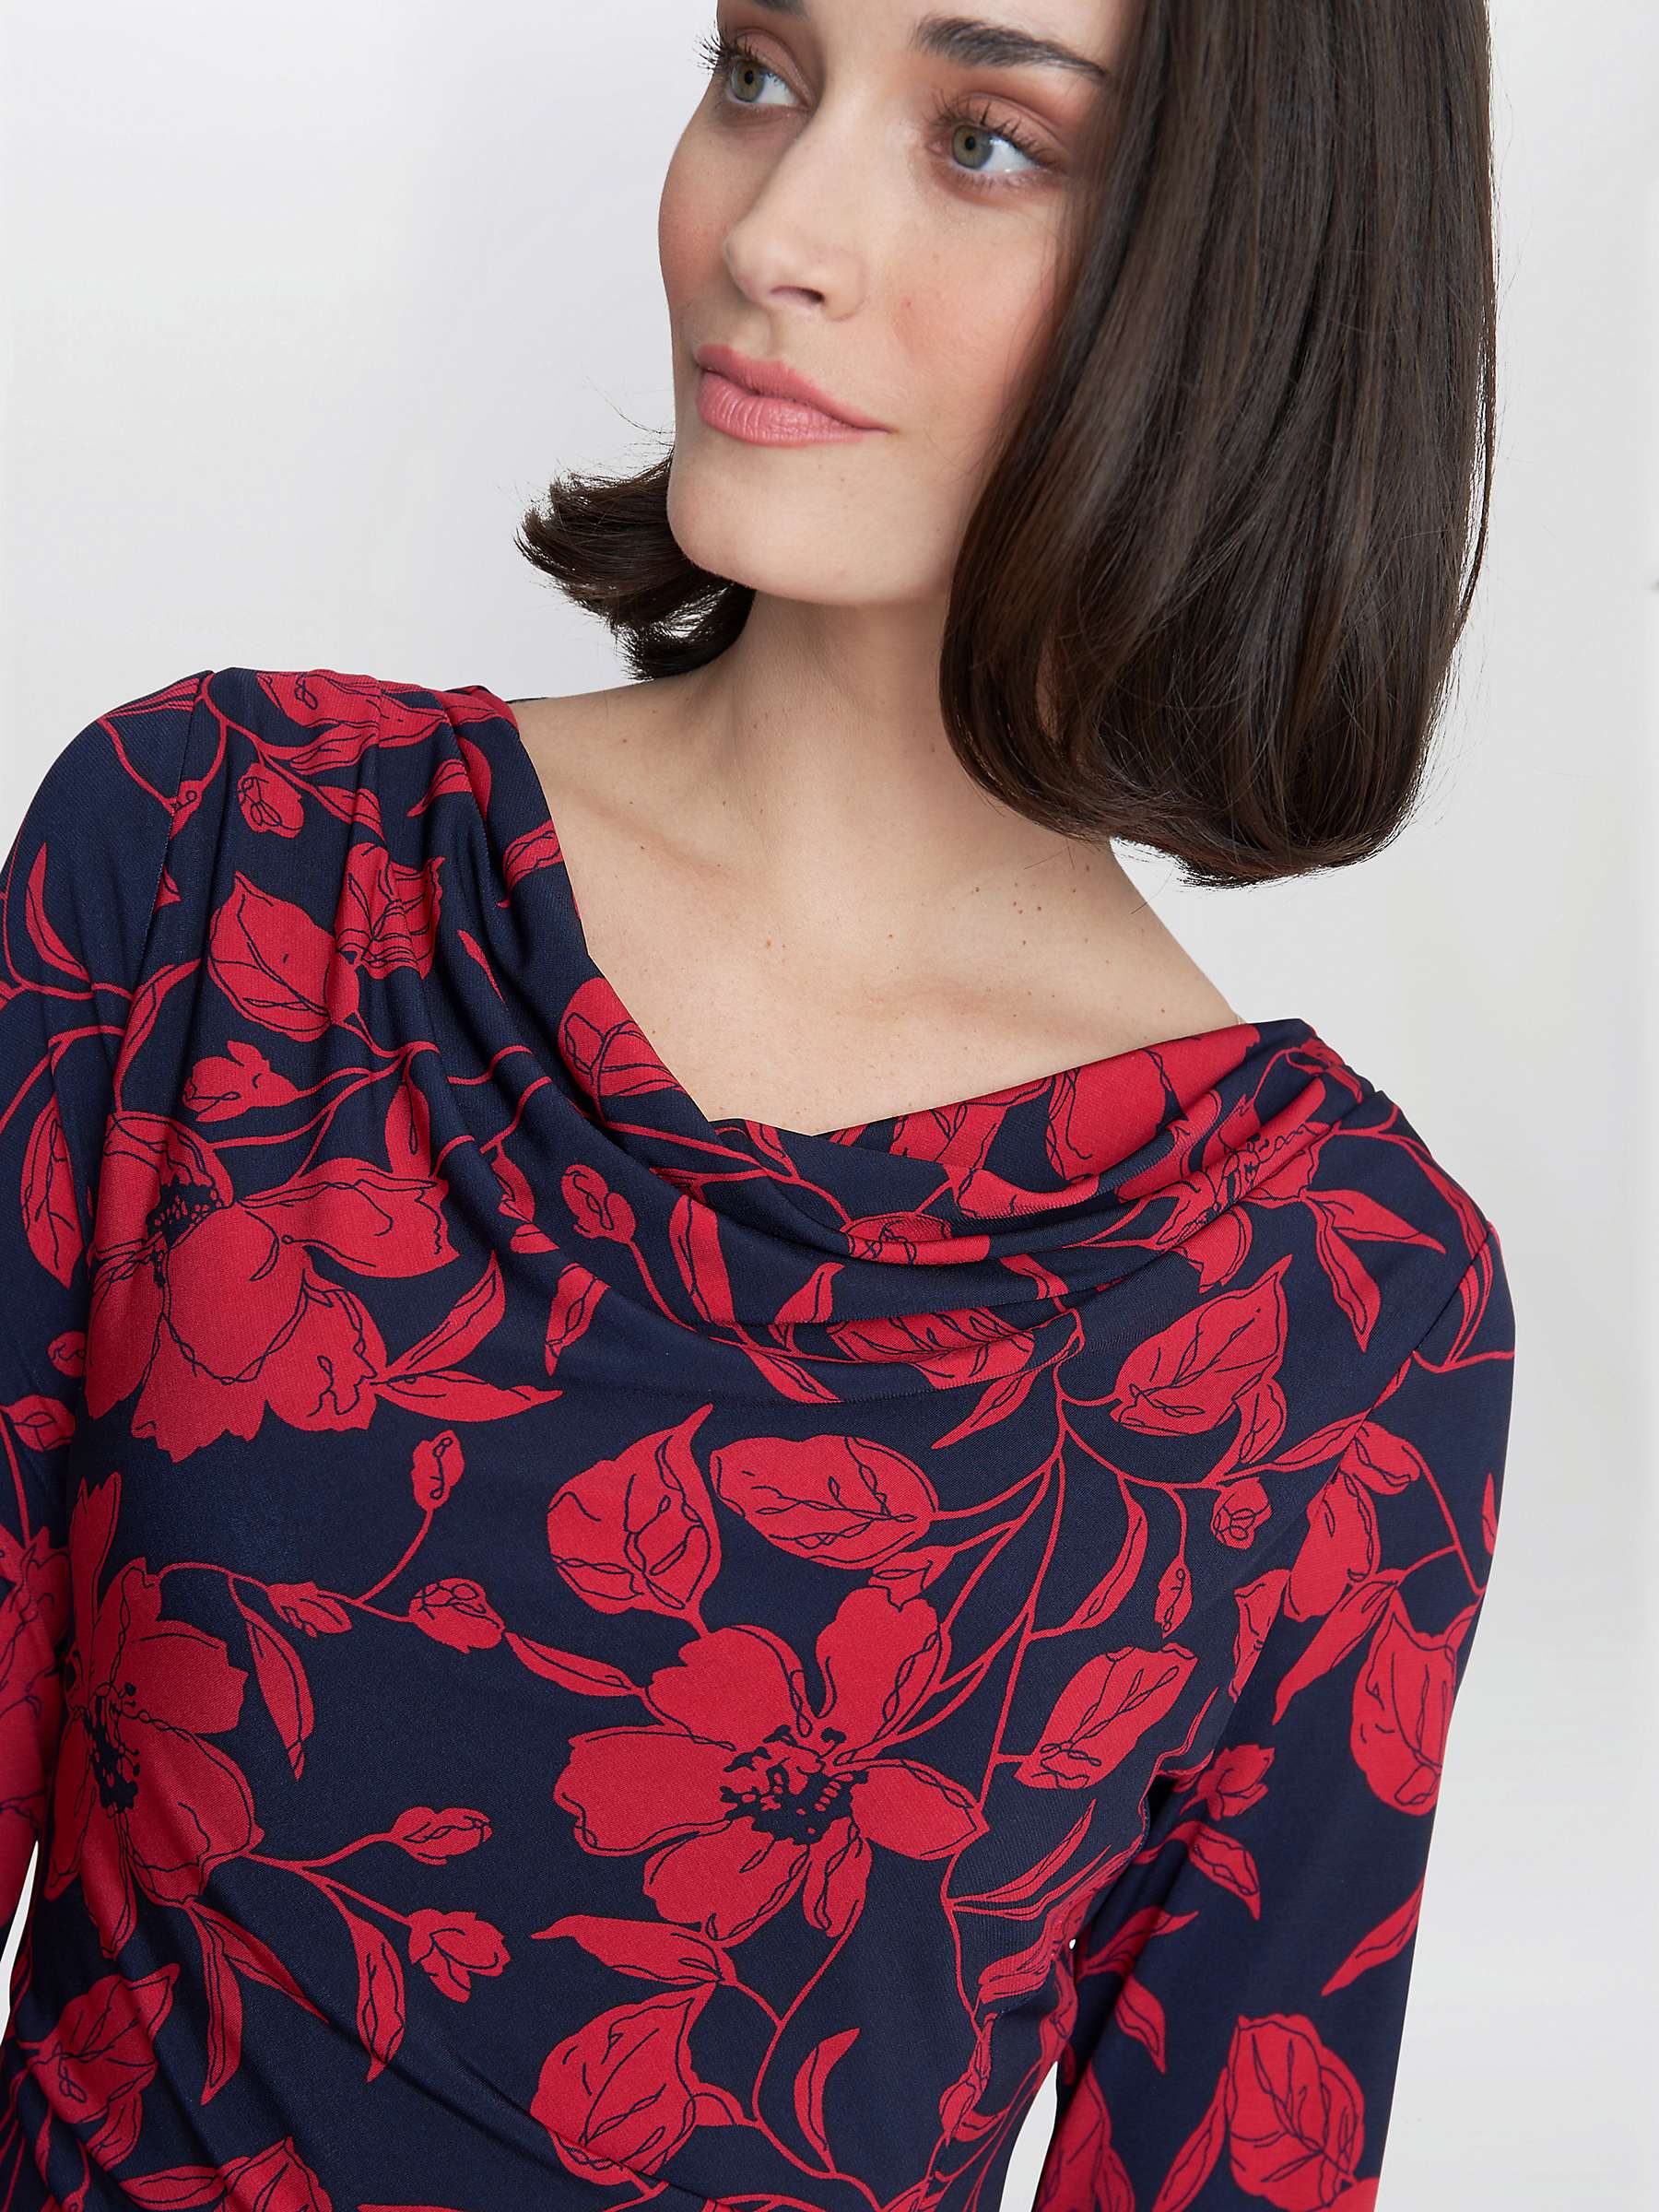 Buy Gina Bacconi Abbie Printed Jersey Cowl Neck Dress, Navy/Red Online at johnlewis.com